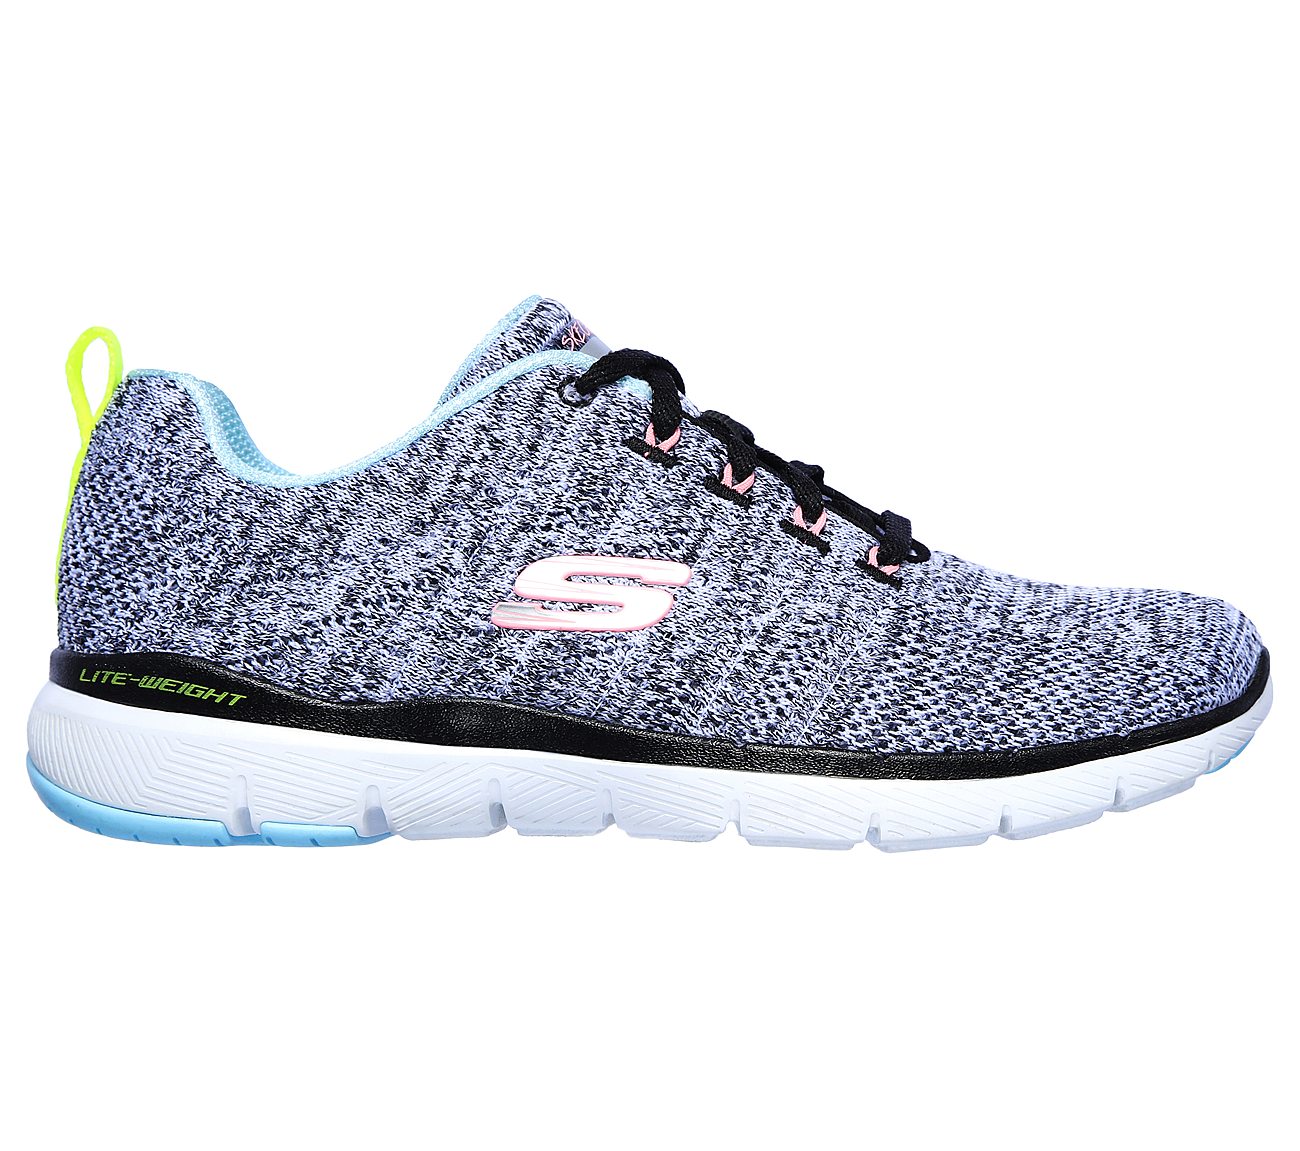 skechers campbell tucson